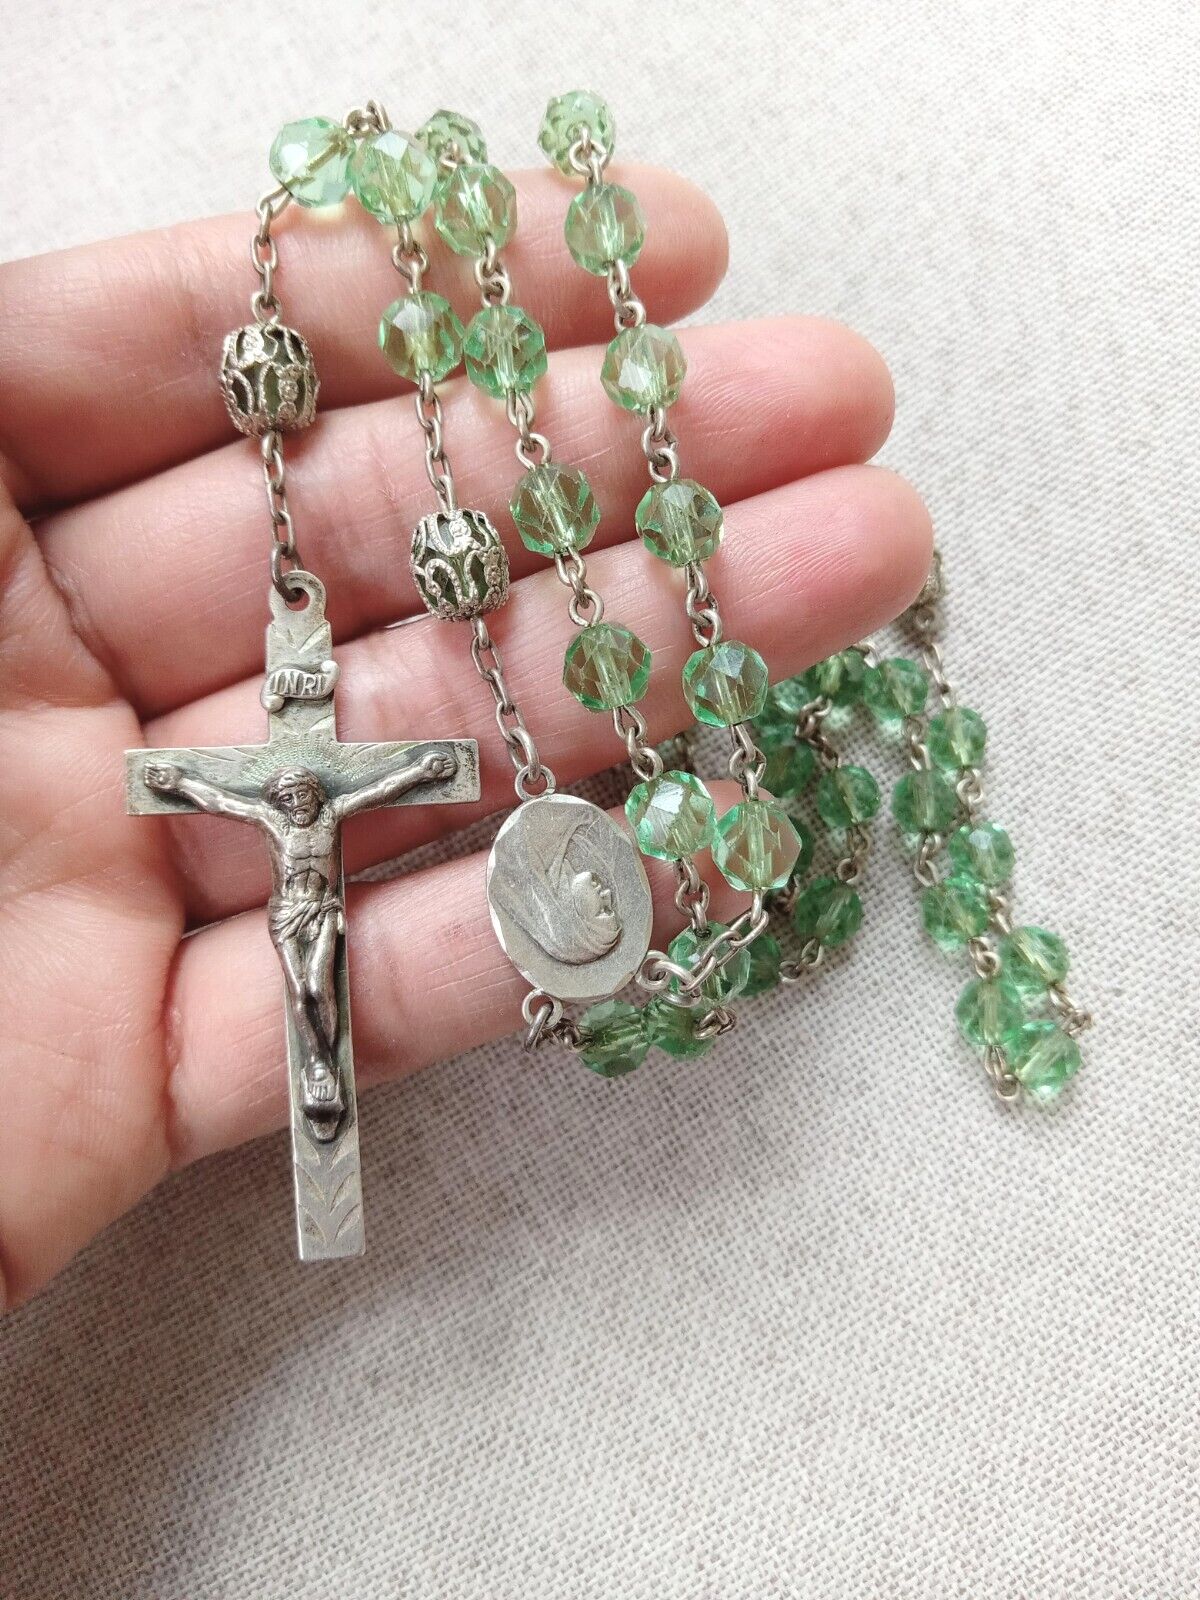 † BLESSED ST CLARE ASSISI SEALED RELIC POCKET SHRINE BUY STERLING GREEN ROSARY †